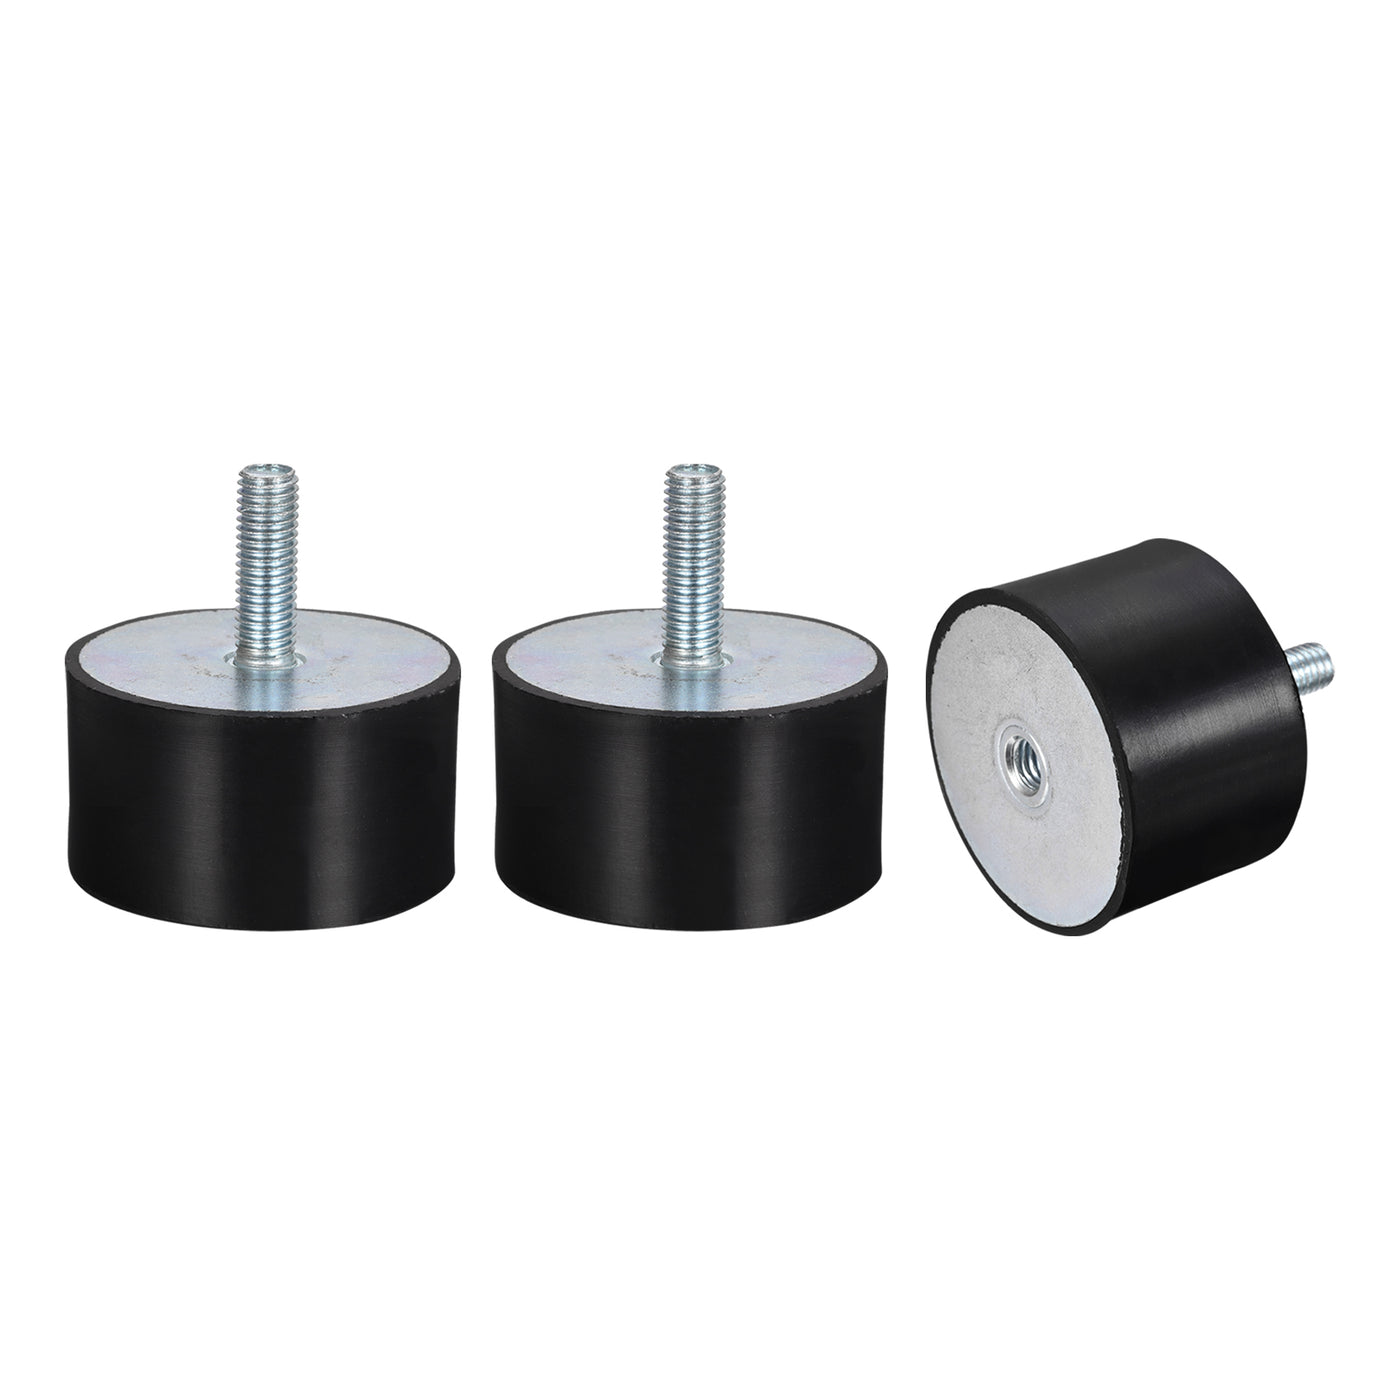 uxcell Uxcell Rubber Mount 3pcs M12 Male/Female Vibration Isolator Shock Absorber D75mmxH40mm